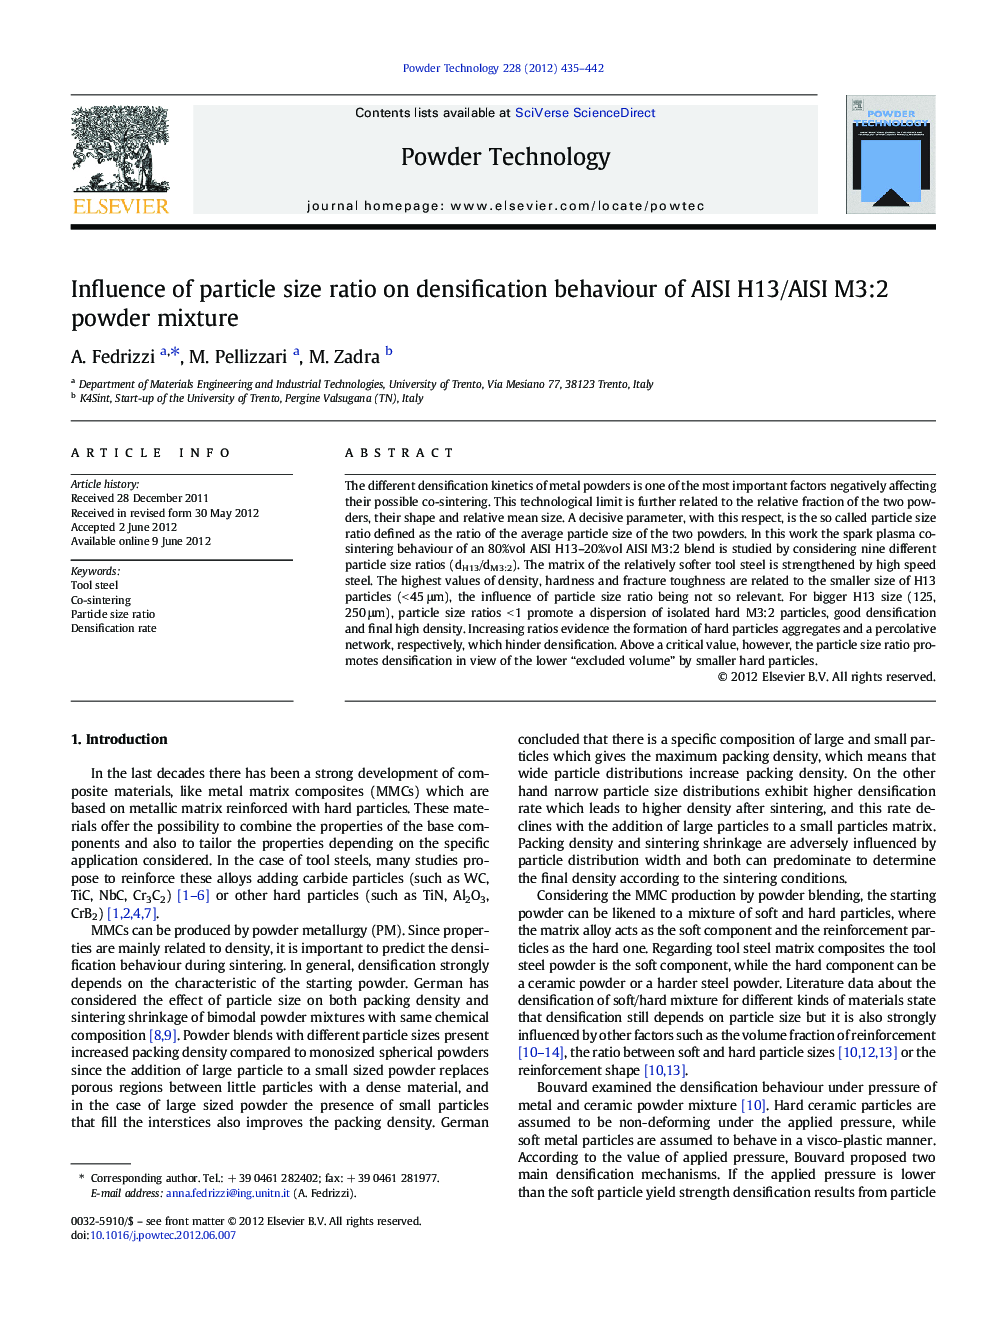 Influence of particle size ratio on densification behaviour of AISI H13/AISI M3:2 powder mixture